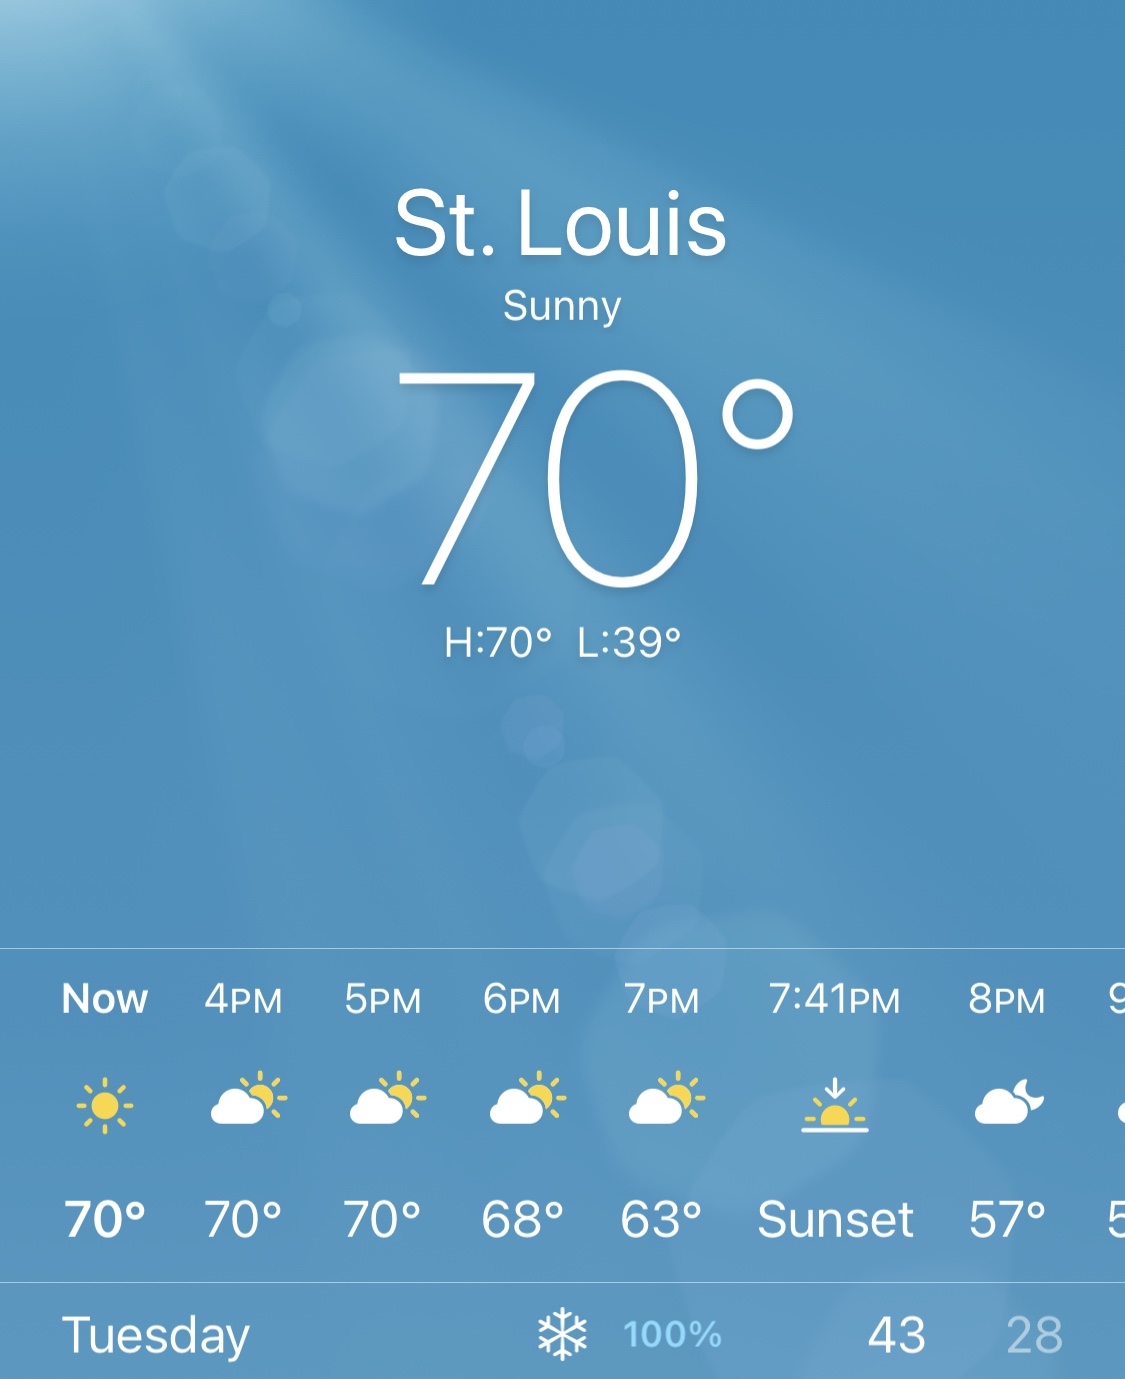 A weather forecast for St. Louis showing a current temperature of 70 degrees and a 100% chance of snow tomorrow.